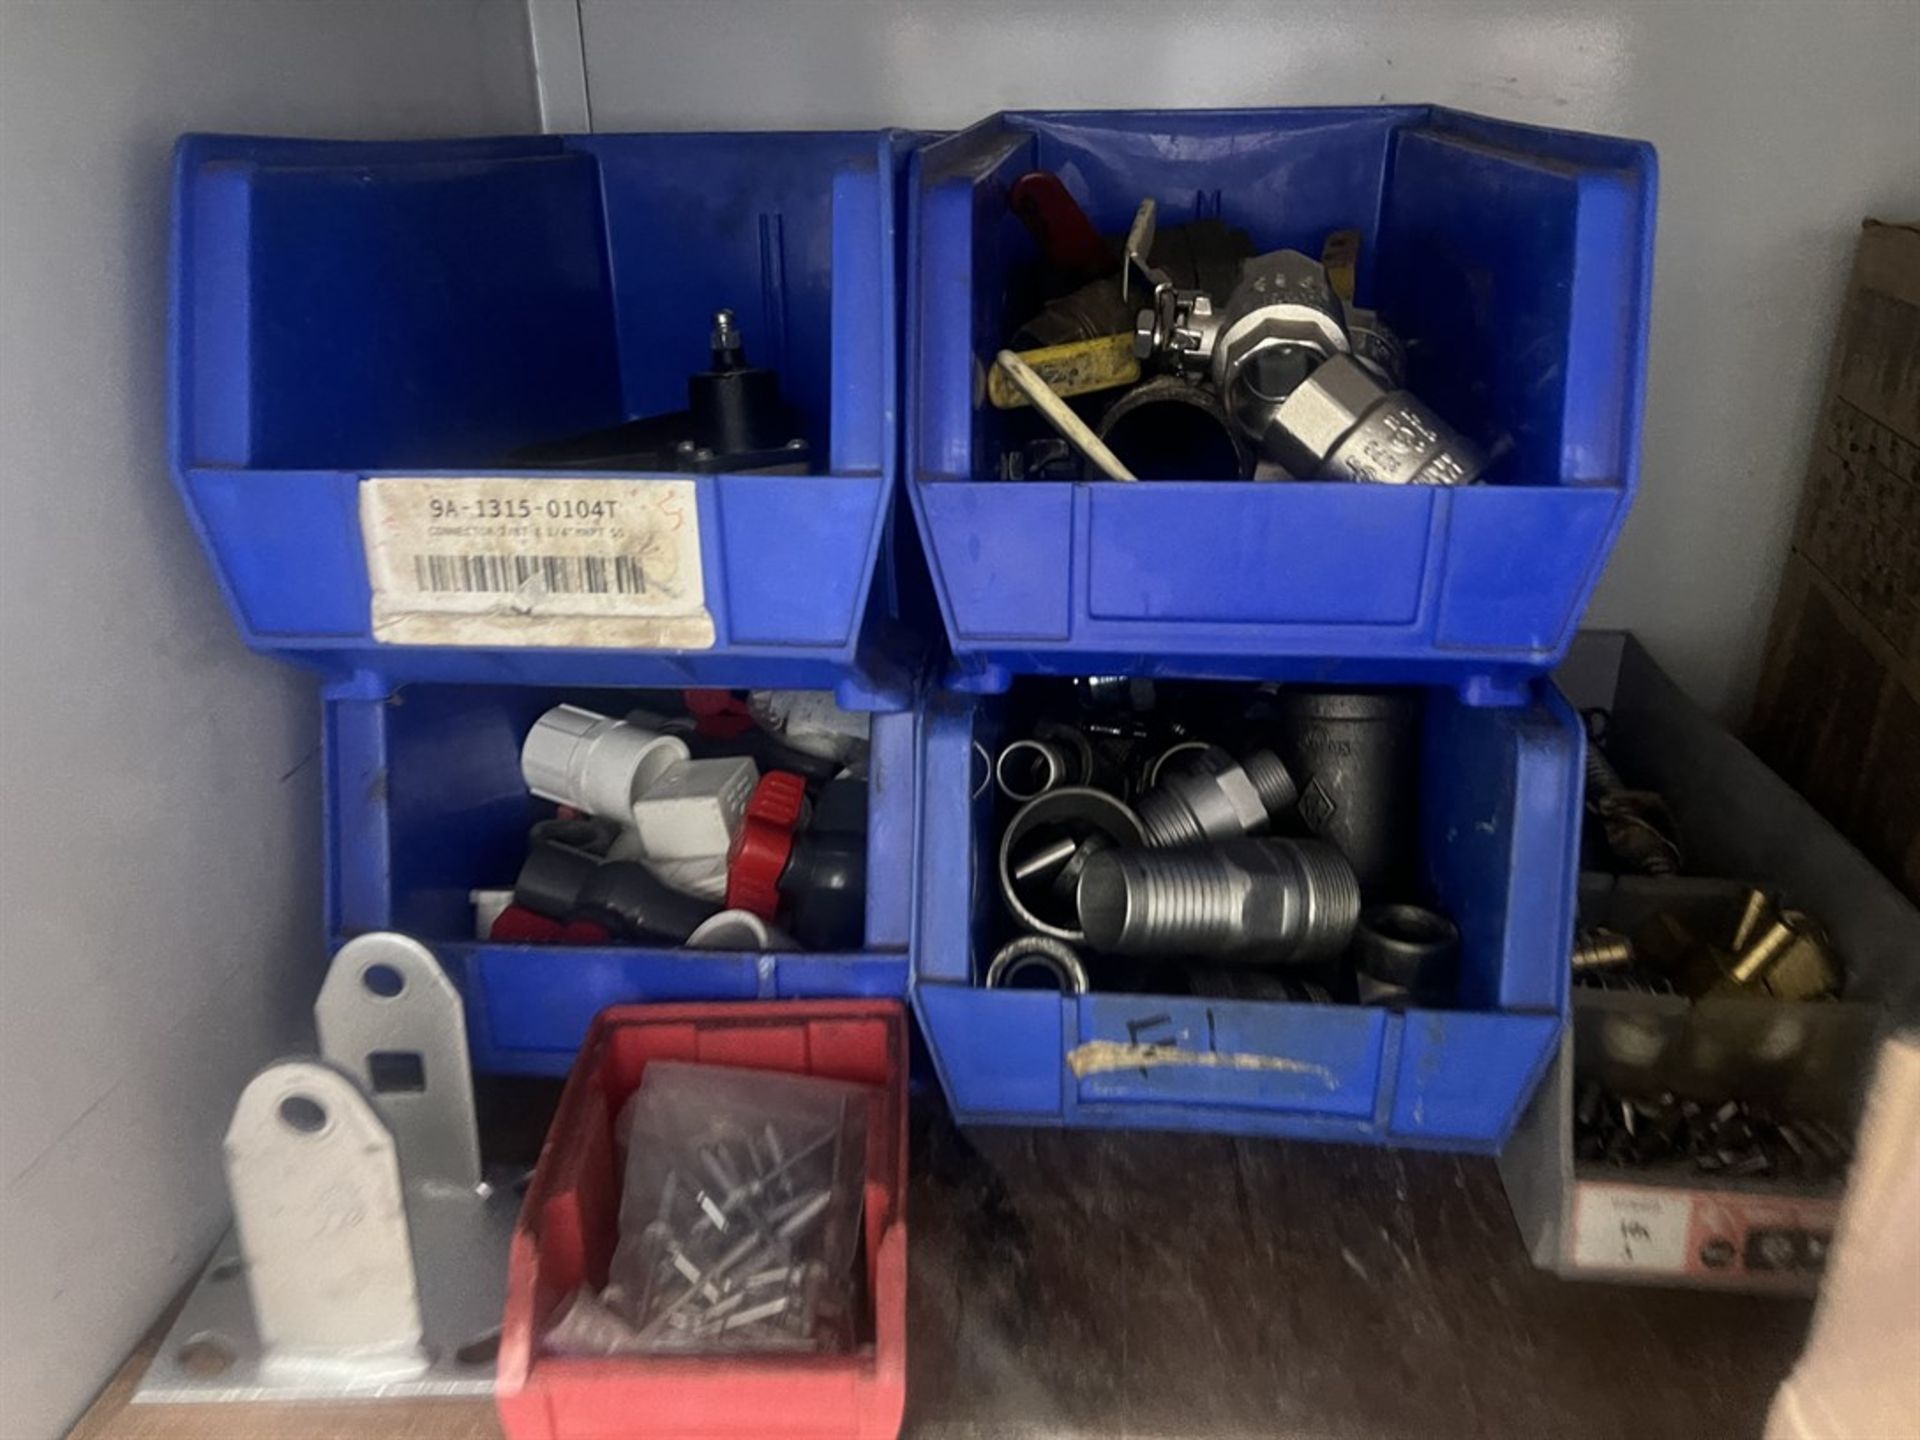 Shop Cabinet w/ Contents Including Hydraulic Fittings, Plumbing Supplies, Gate Valves, O-Rings, - Image 3 of 12